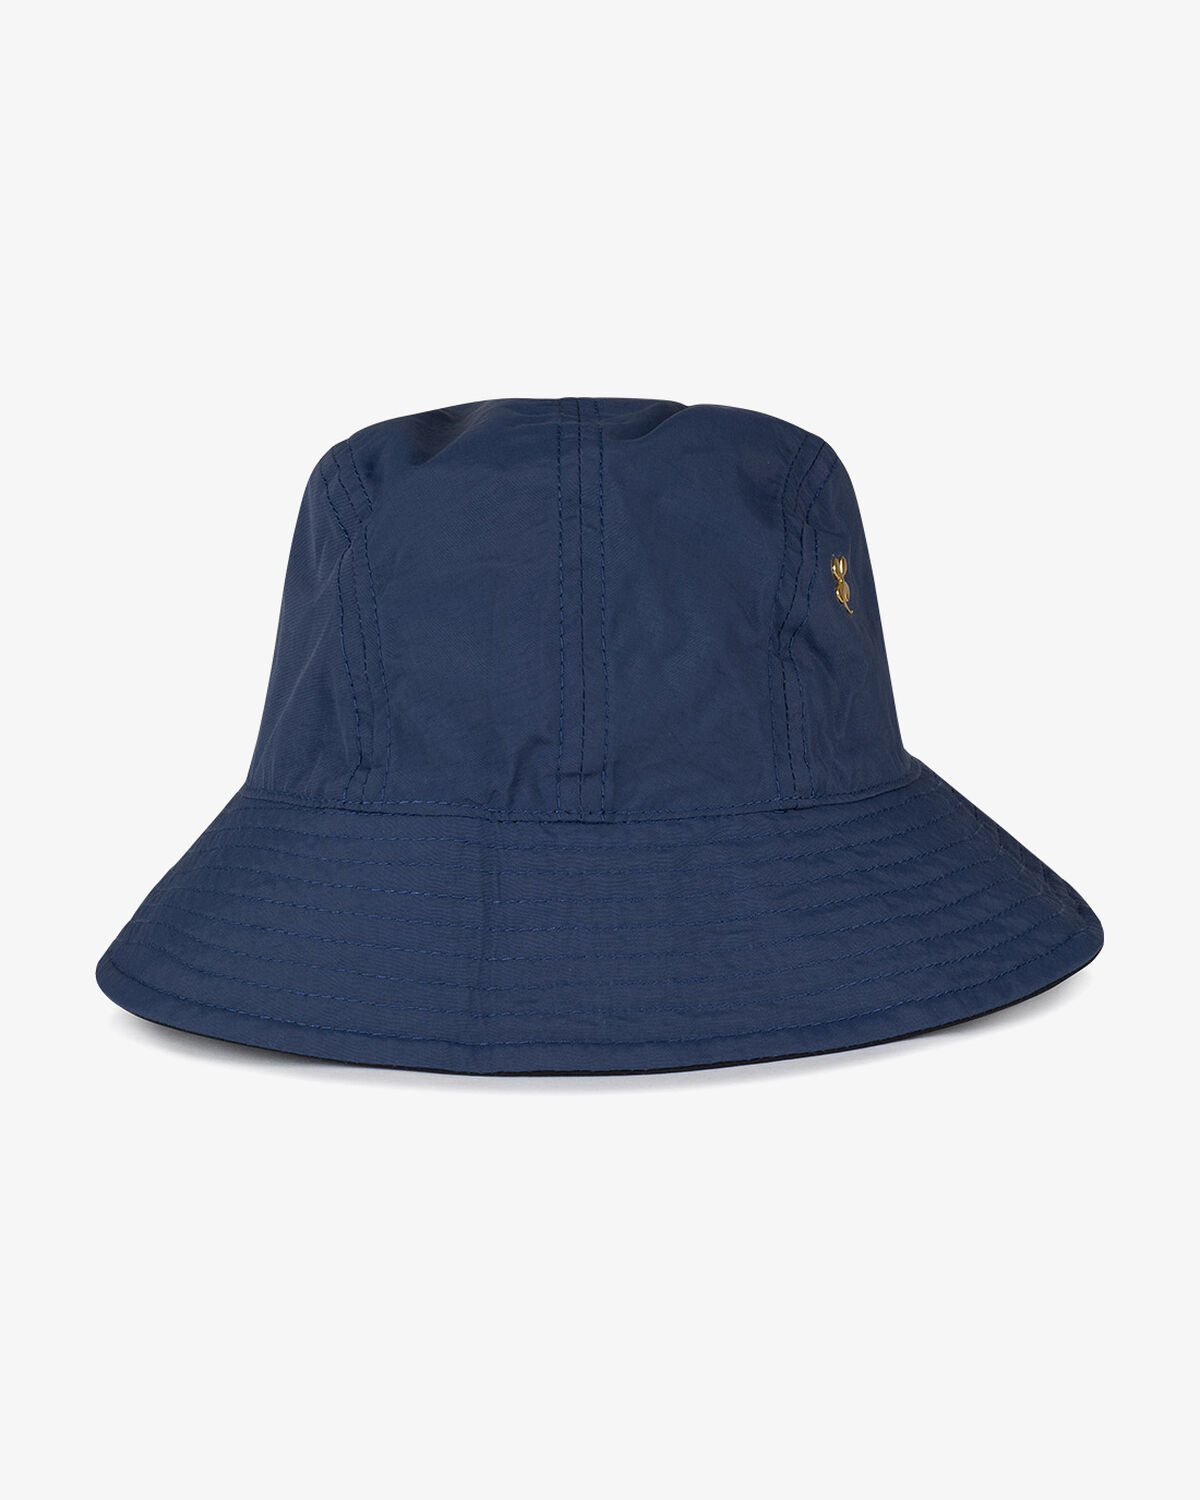 Adults' Mountain Classic Bucket Hat, 49% OFF